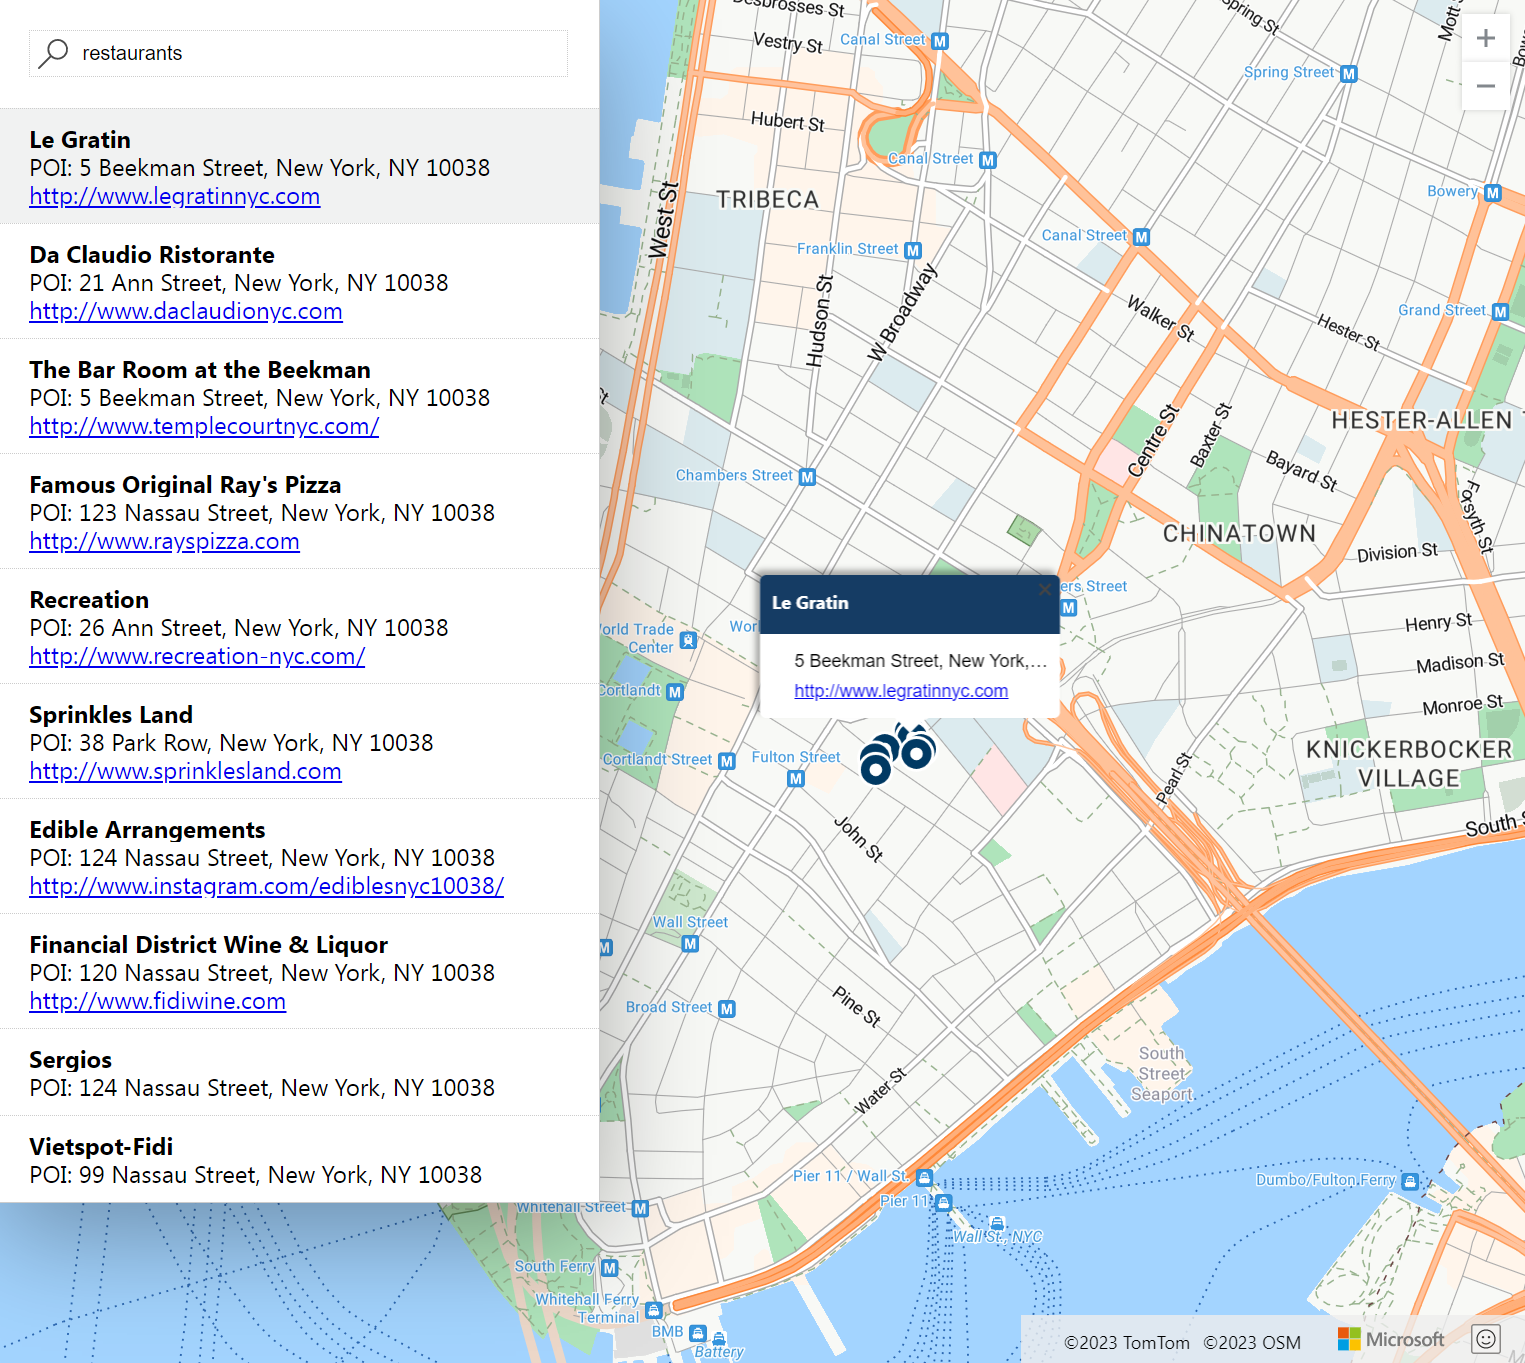 Screenshot showing the interactive map search web application.